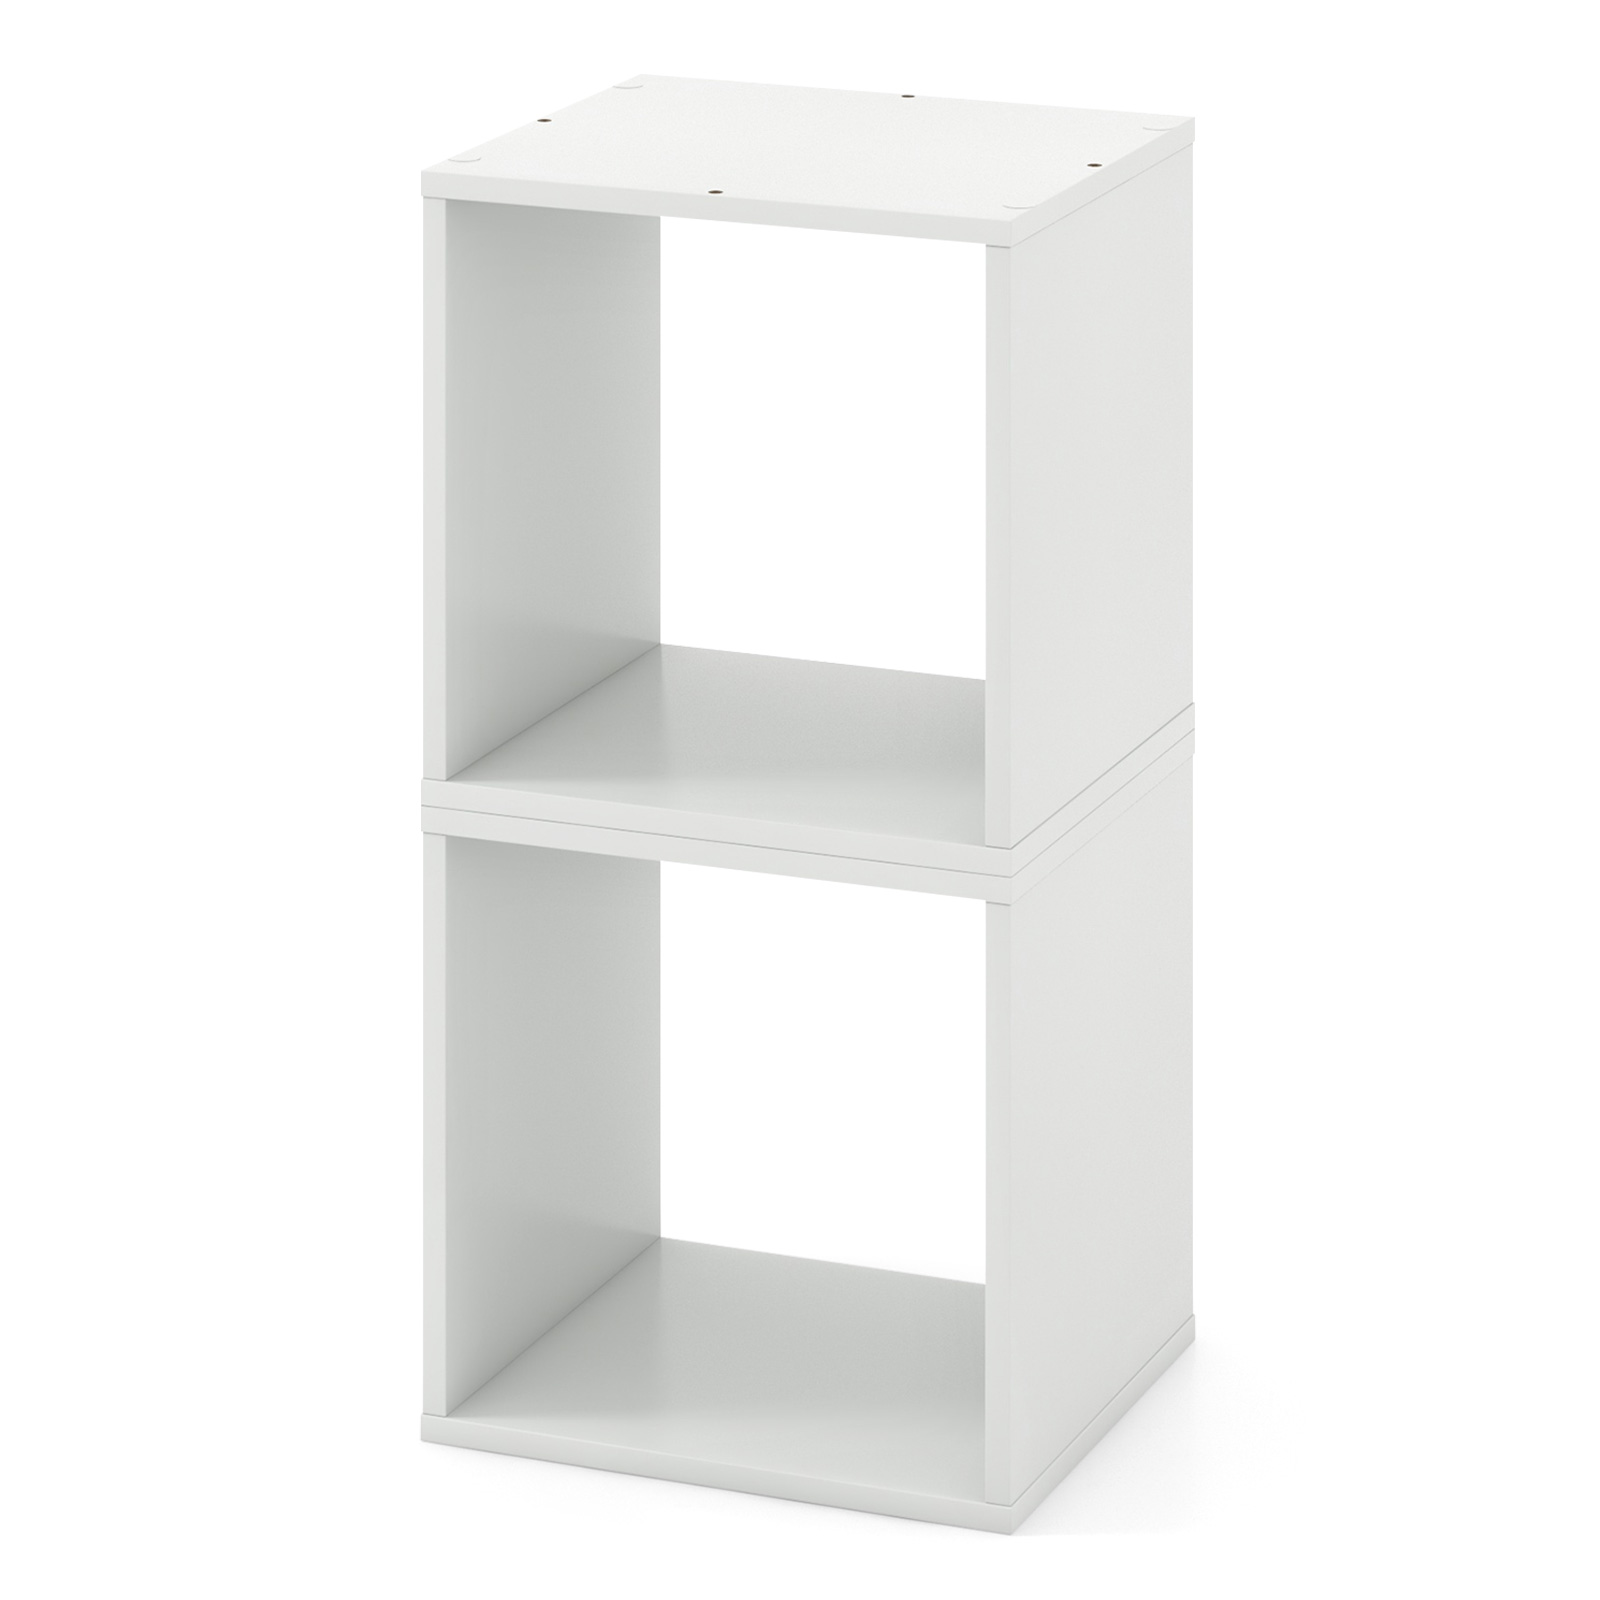 Set_of_2_Stackable_Nightstand_with_Storage_Cubes_white-7.jpg